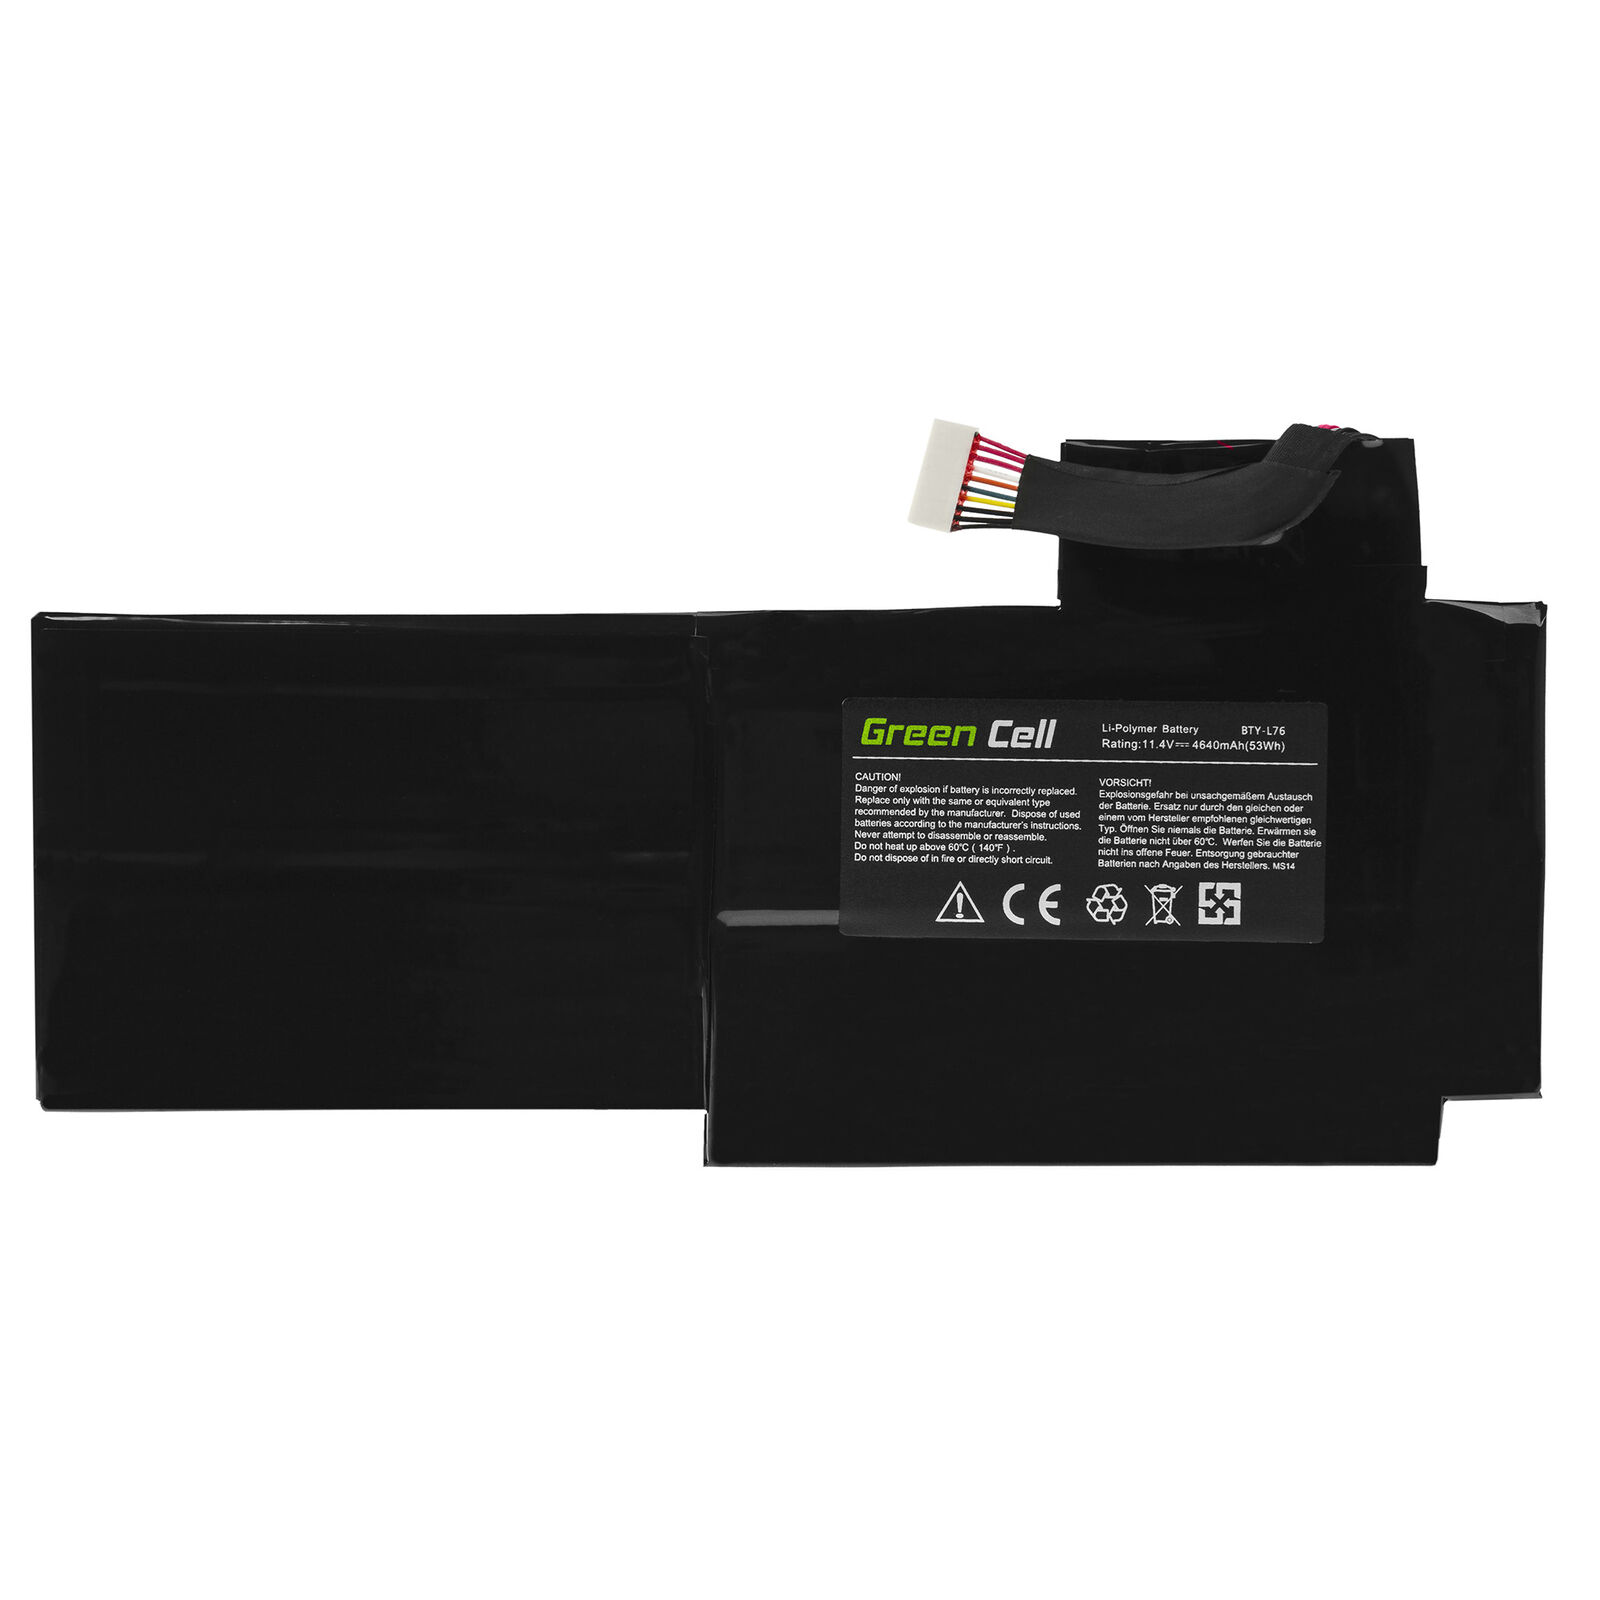 MSI GS70 GS72 WS72 MS-1771 MS-1776 20D-011CN 6QD-041XCN compatible battery